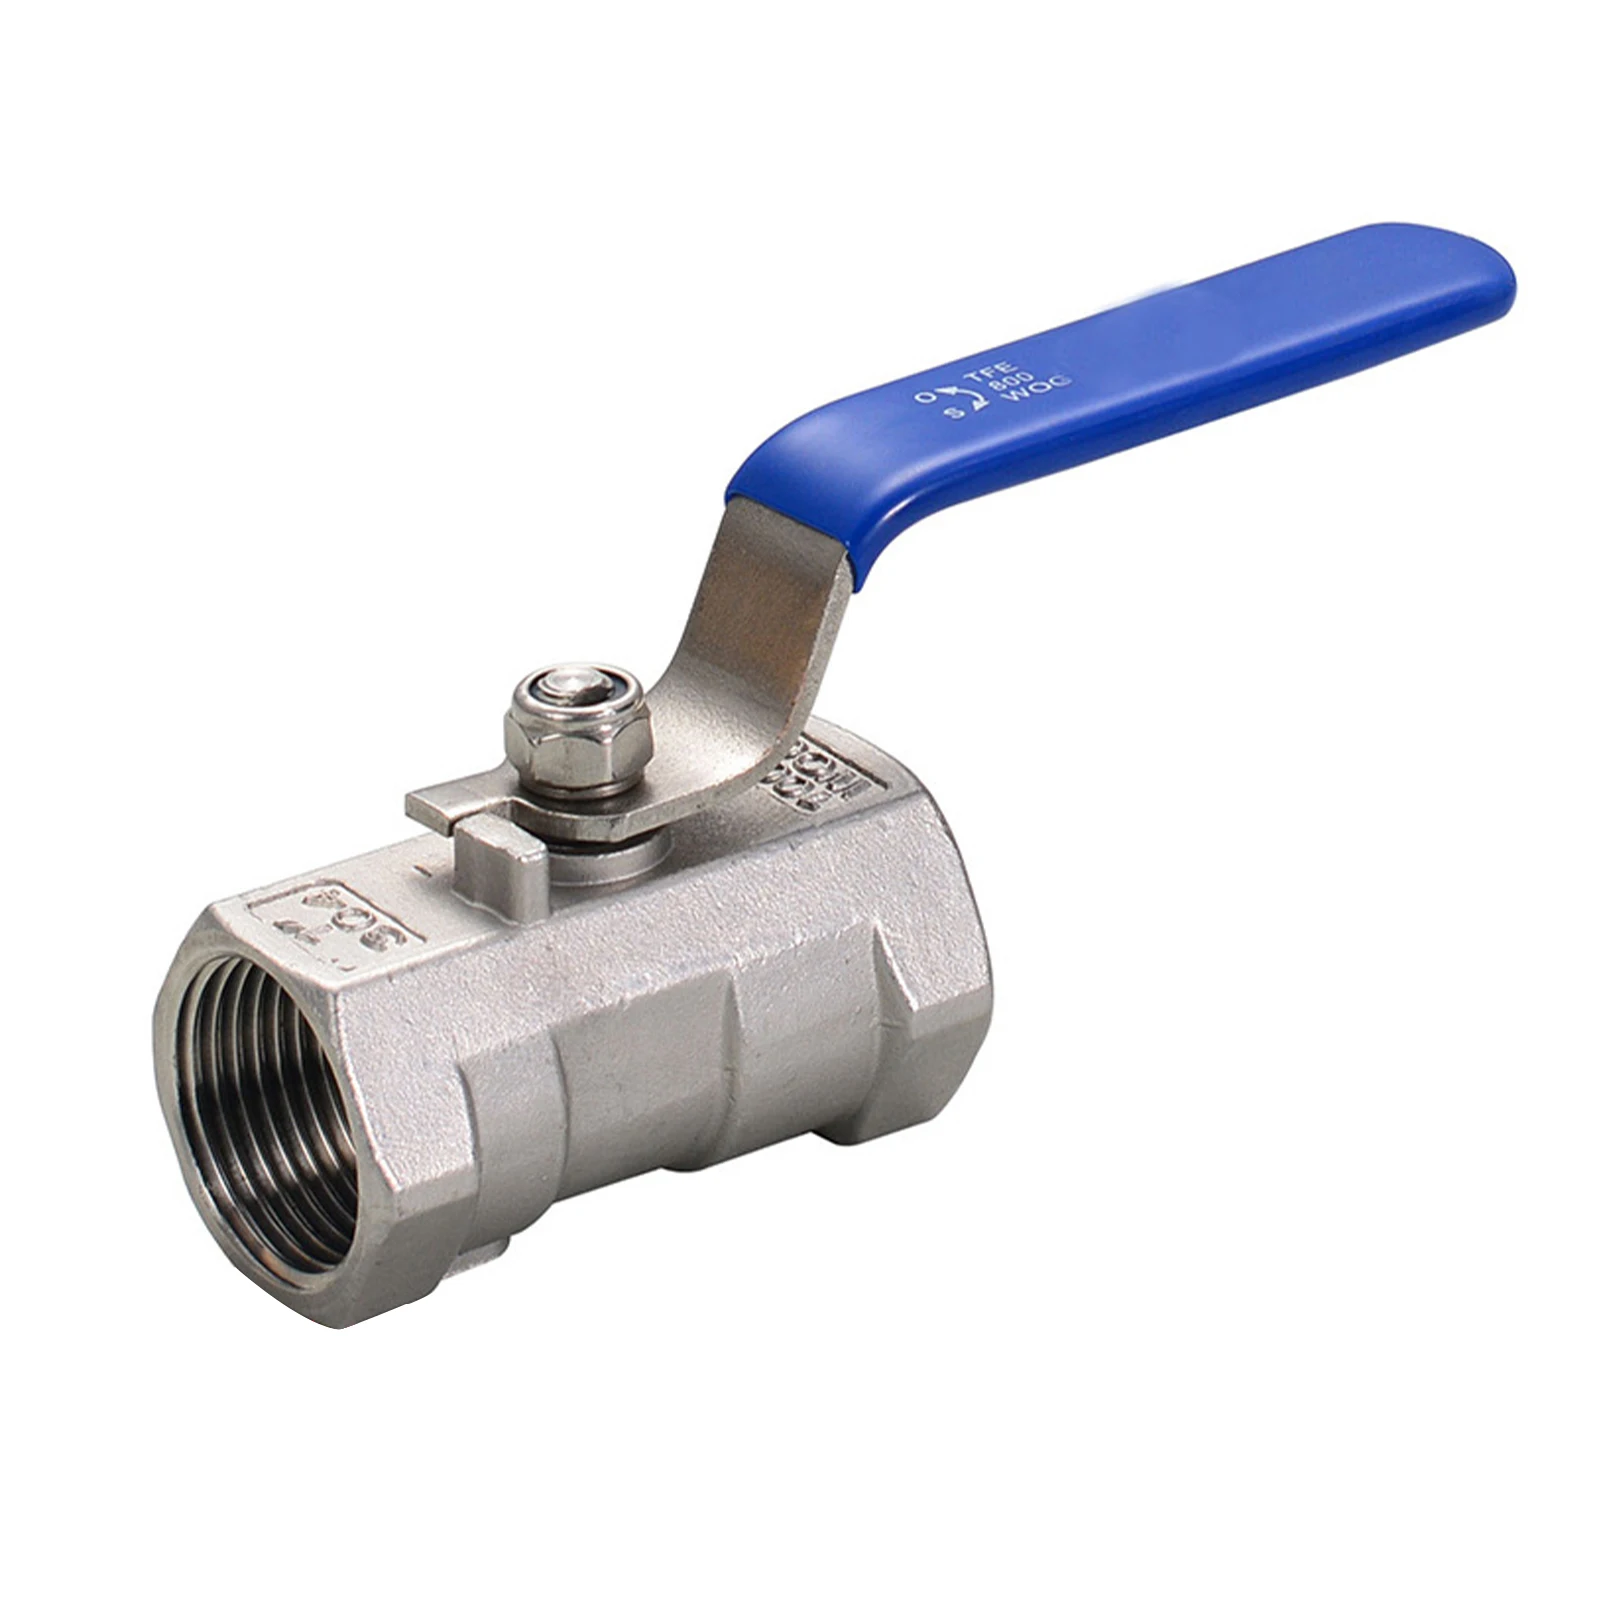 

Home 1-1/2inch DN40 Ball Valve Gas Professional Easy Install Internal Thread With Handle Tools Steam Durable Stainless Steel